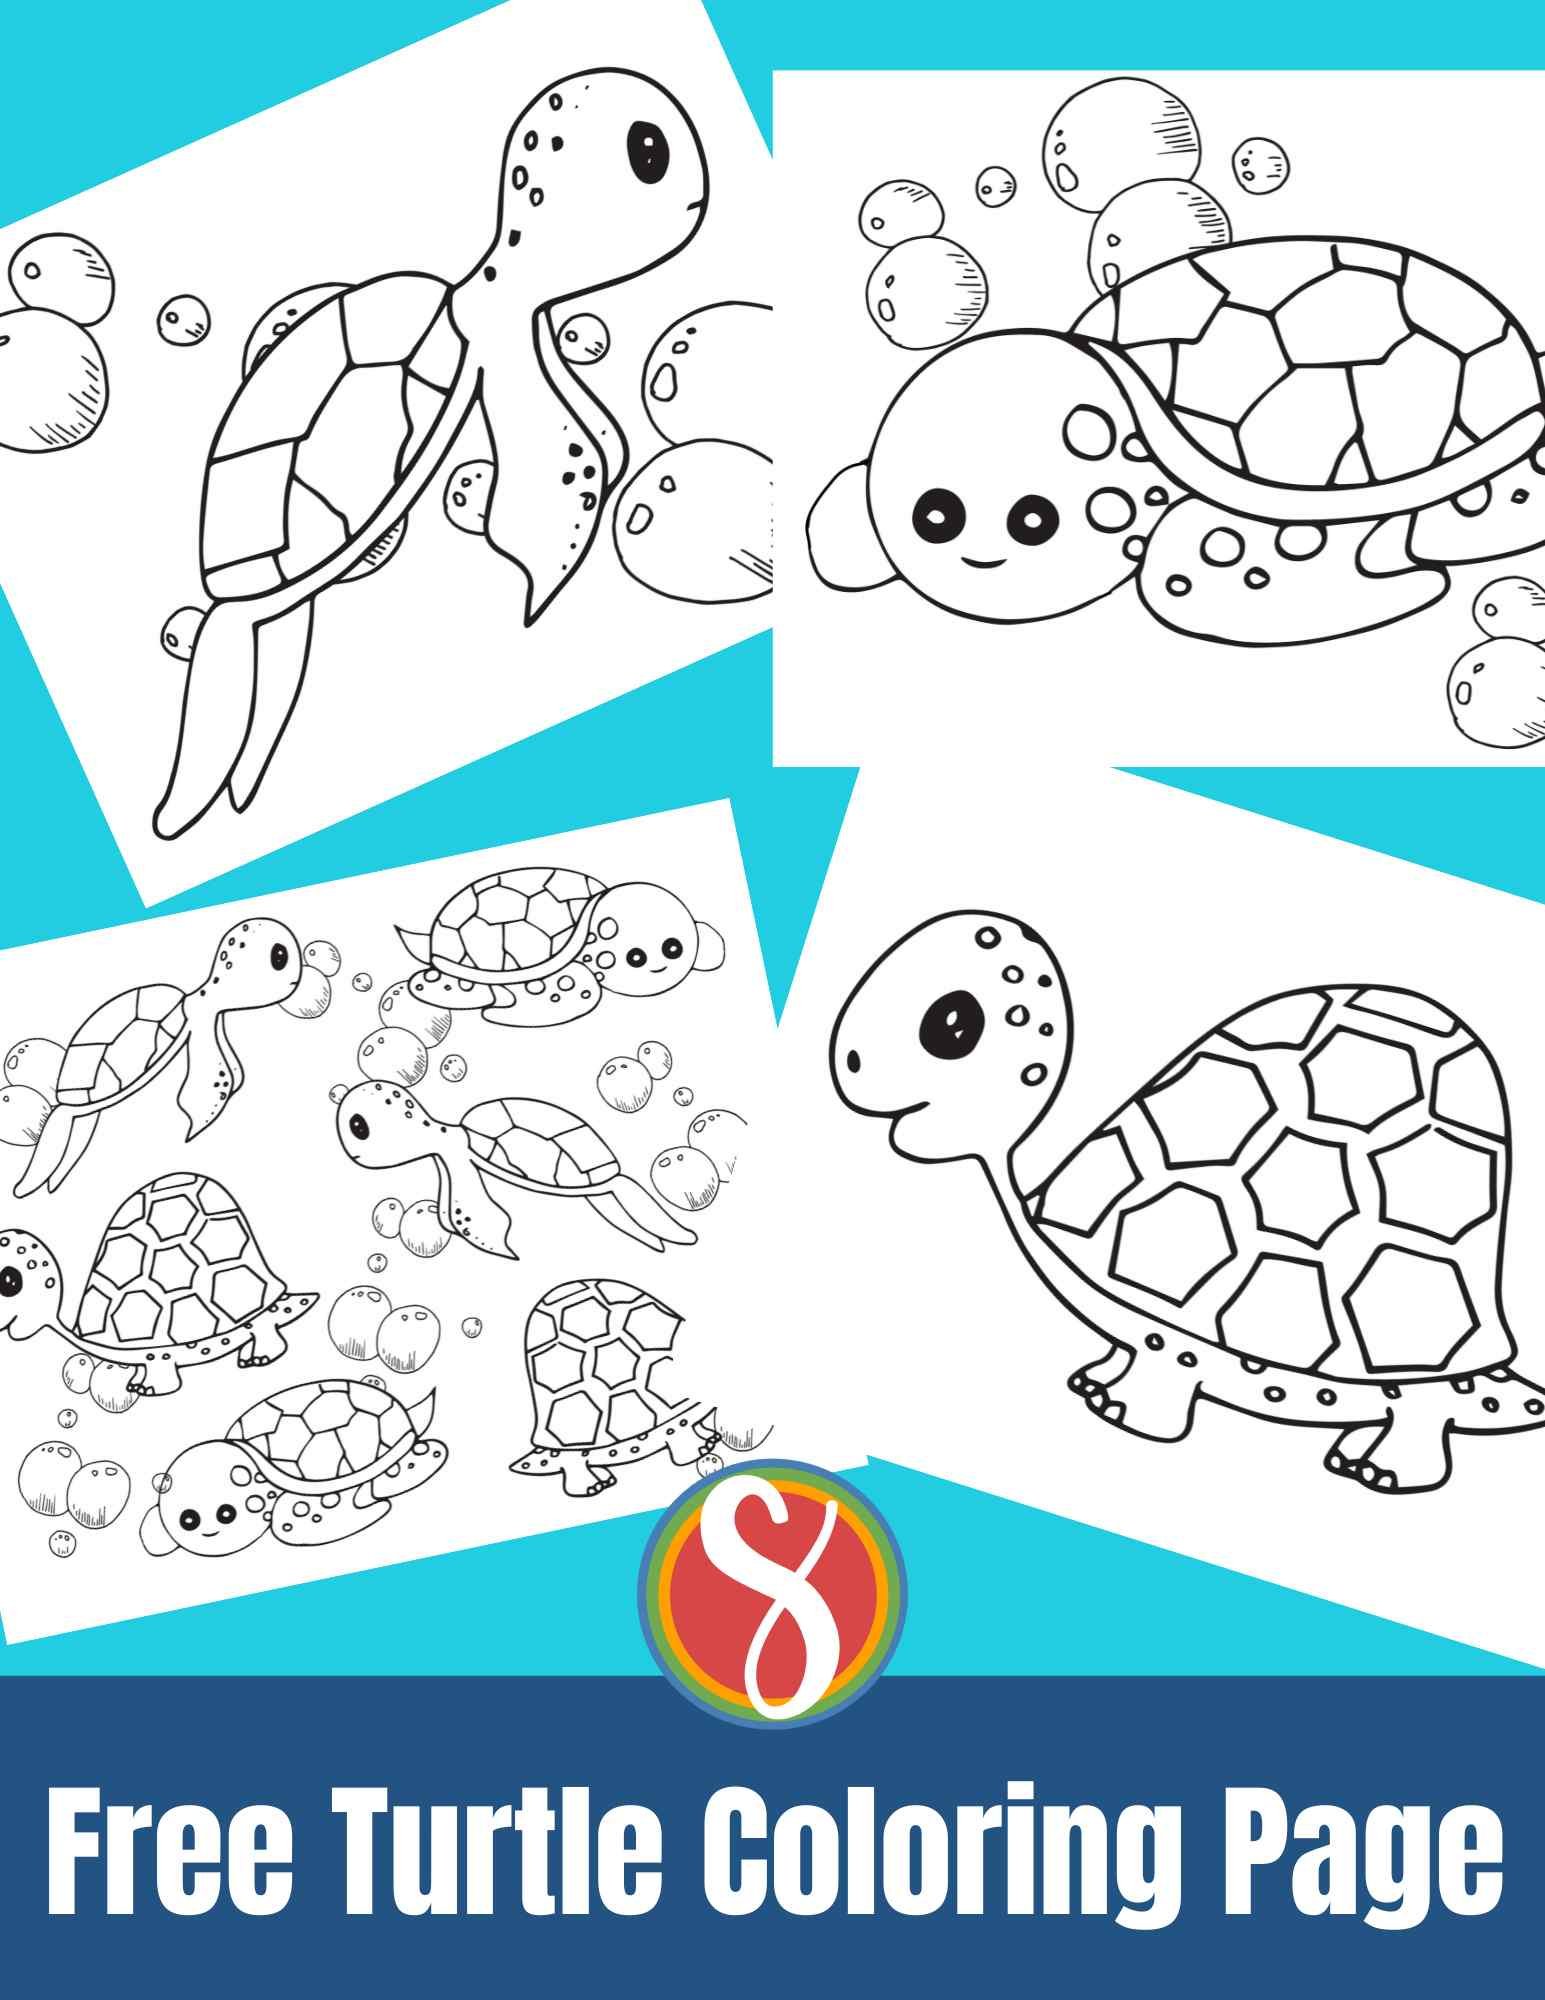 4 different turtle coloring pages with a background of two shades of blue and the text "Free turtle coloring pages"